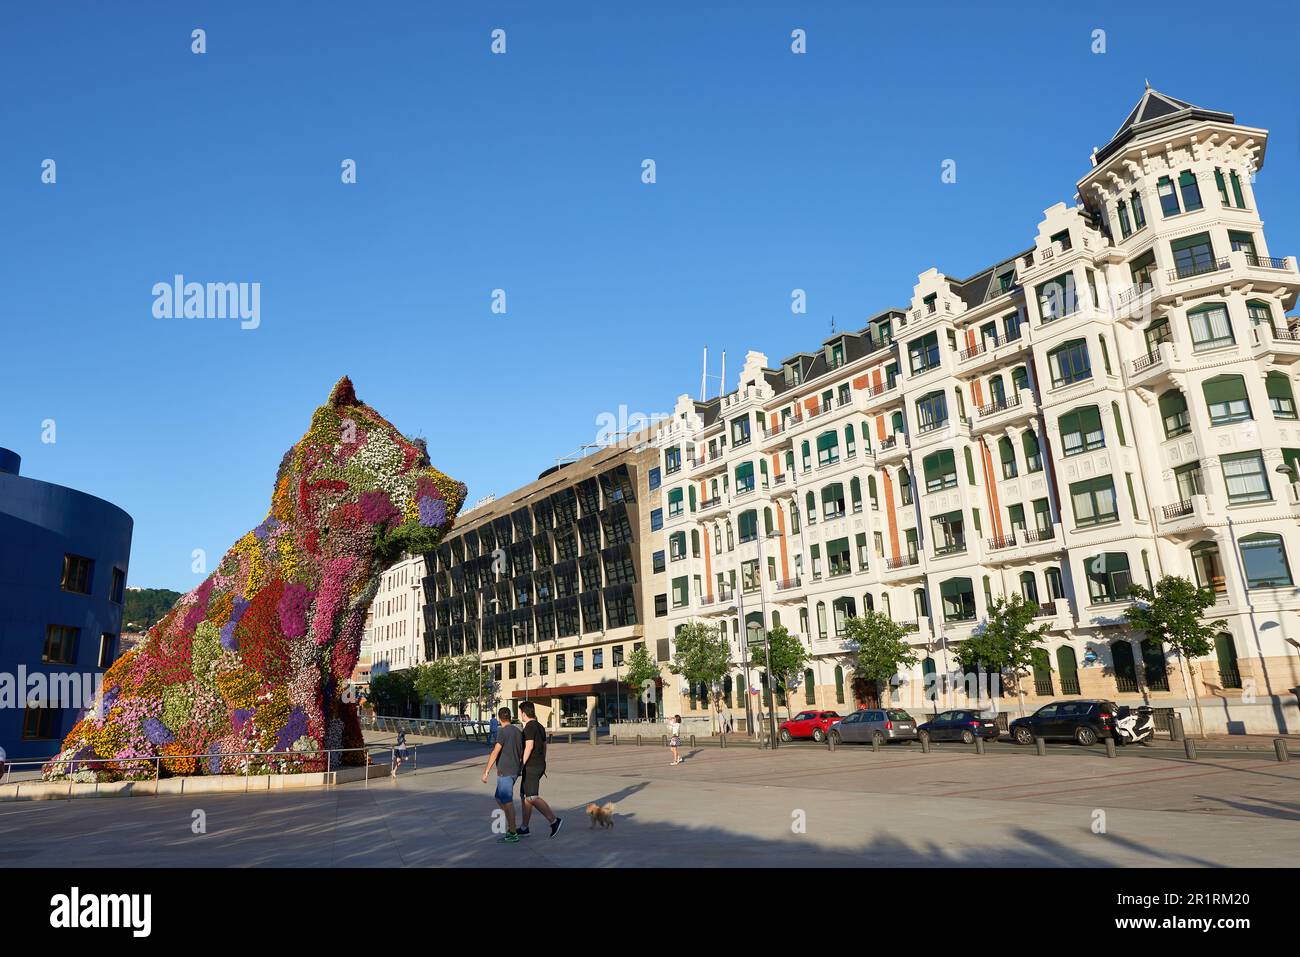 Puppy flower feature floral art in dog form by Jeff Koons at Guggenheim Museum, Bilbao, Basque Country, Euskadi, Spain, Europe. Stock Photo